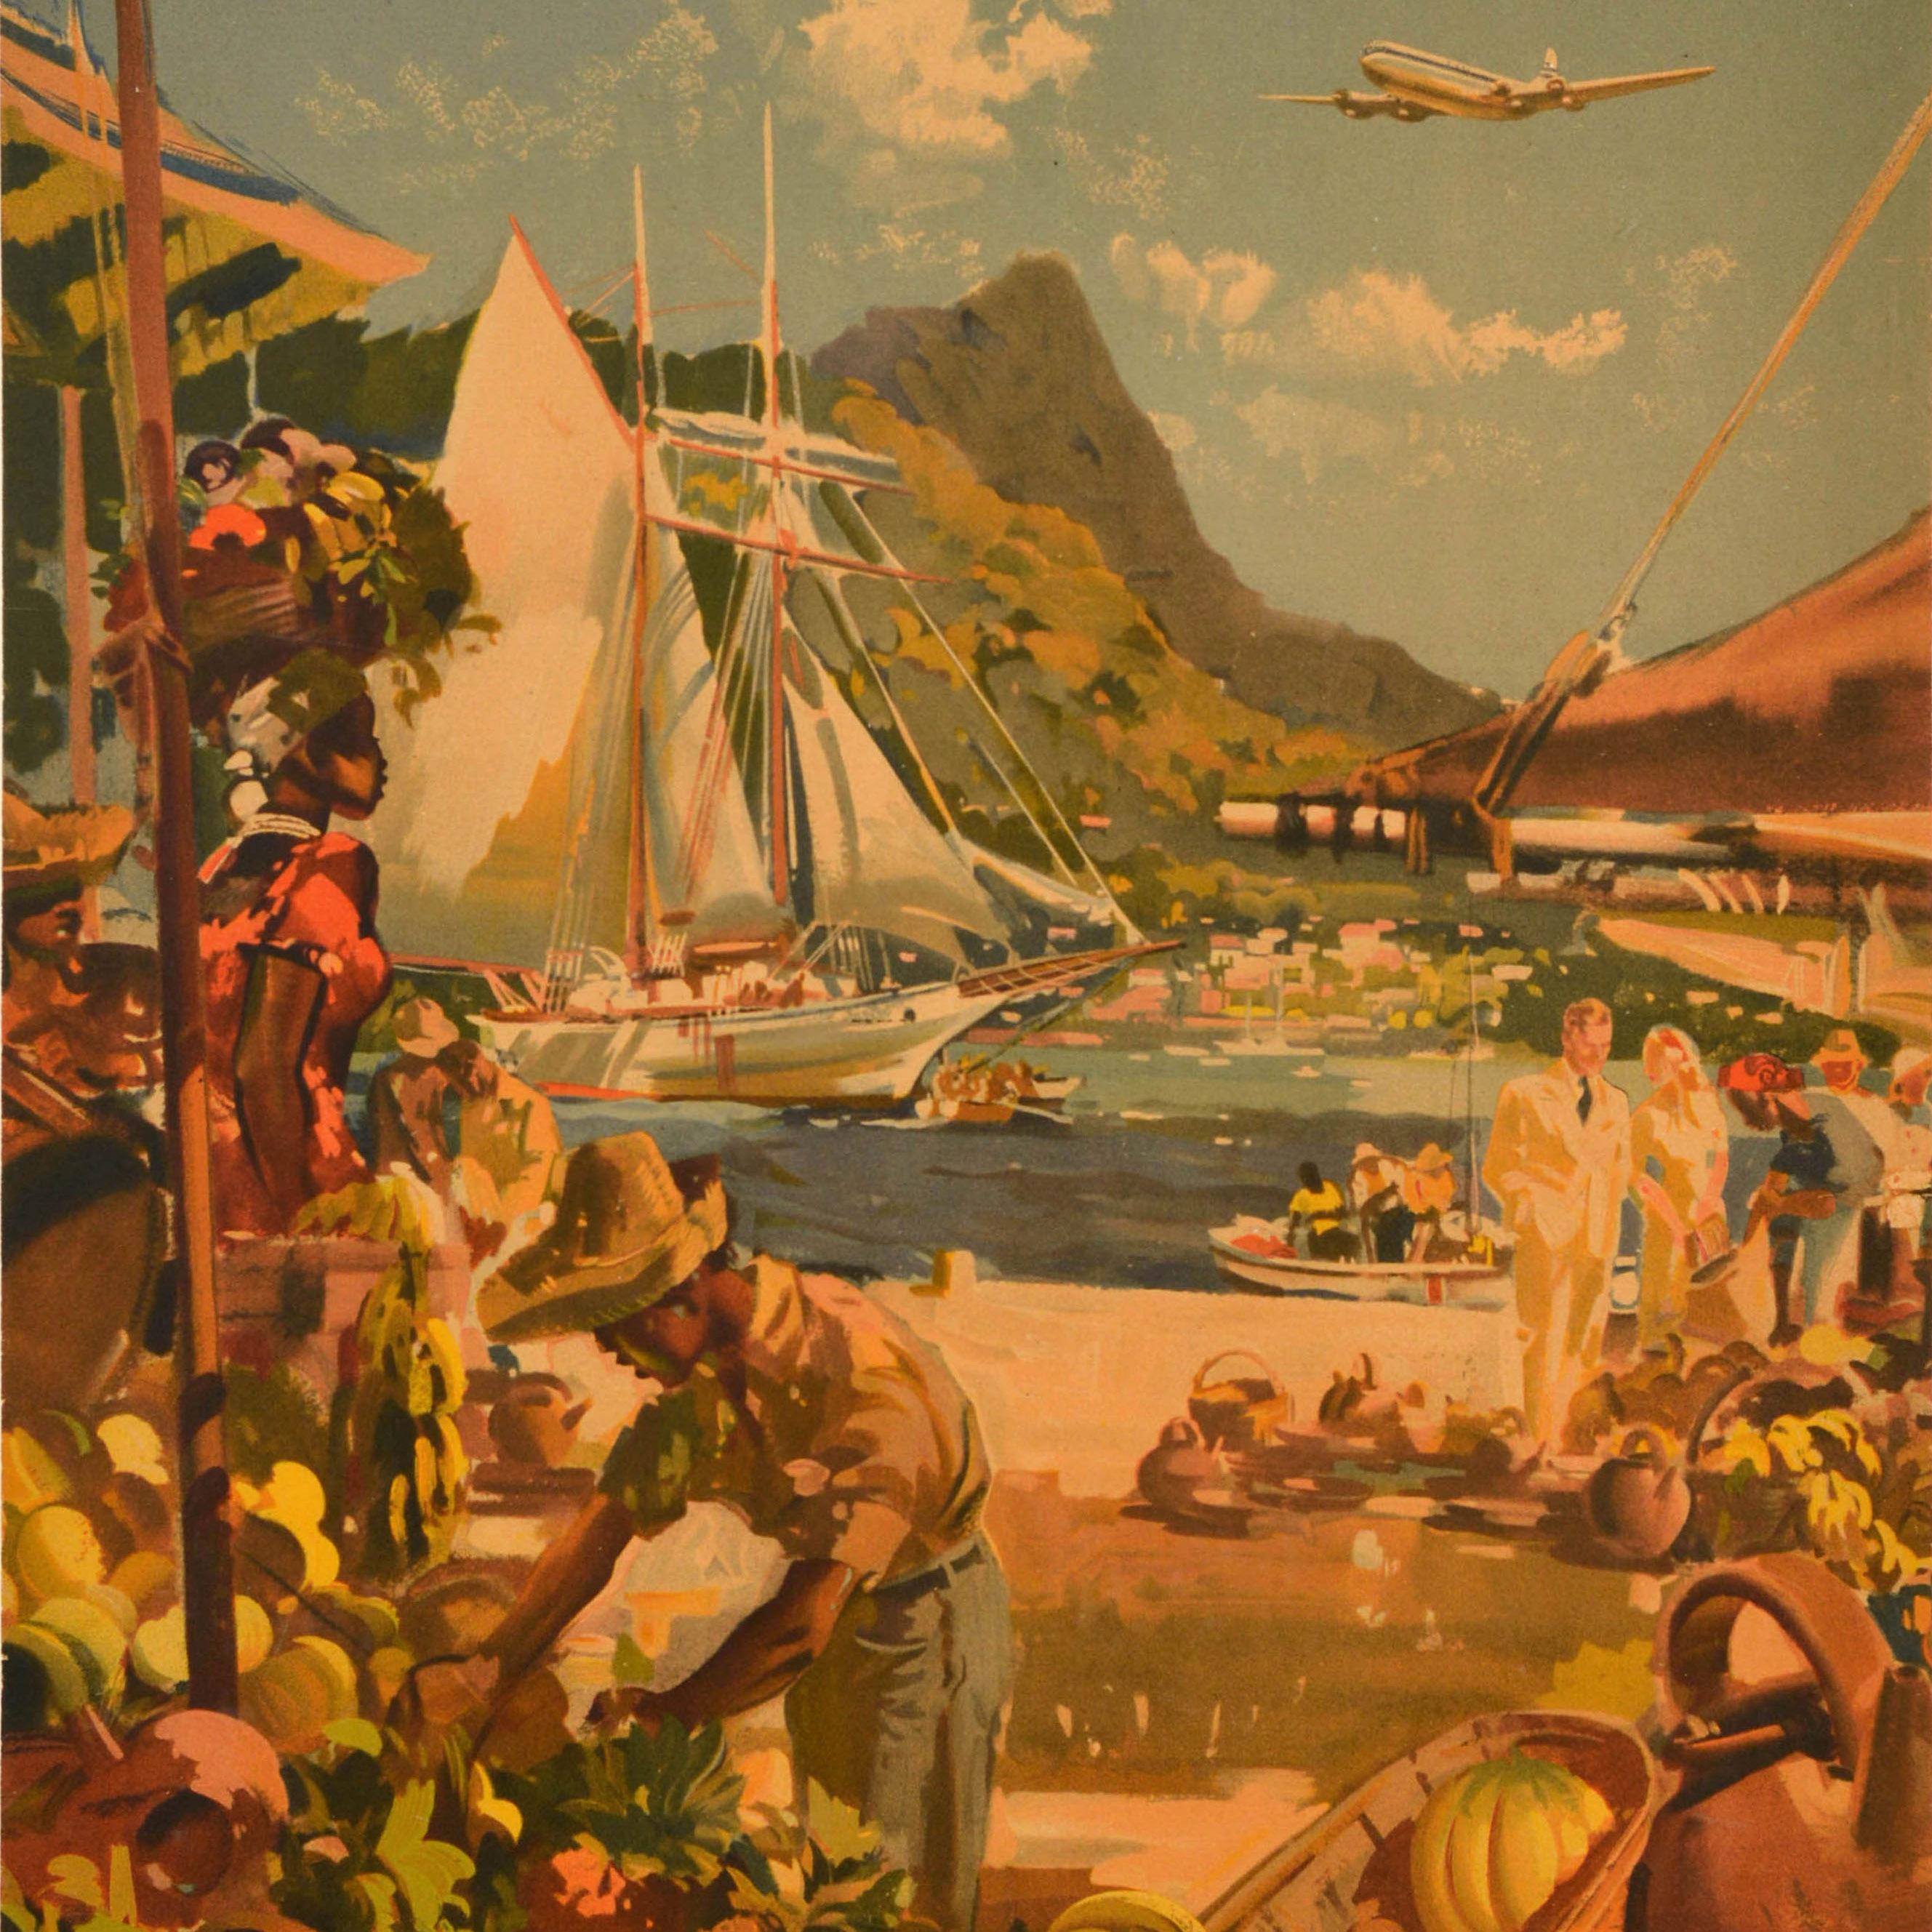 Original Vintage Travel Advertising Poster Fly To The Caribbean By BOAC Wootton - Brown Print by Frank Wootton